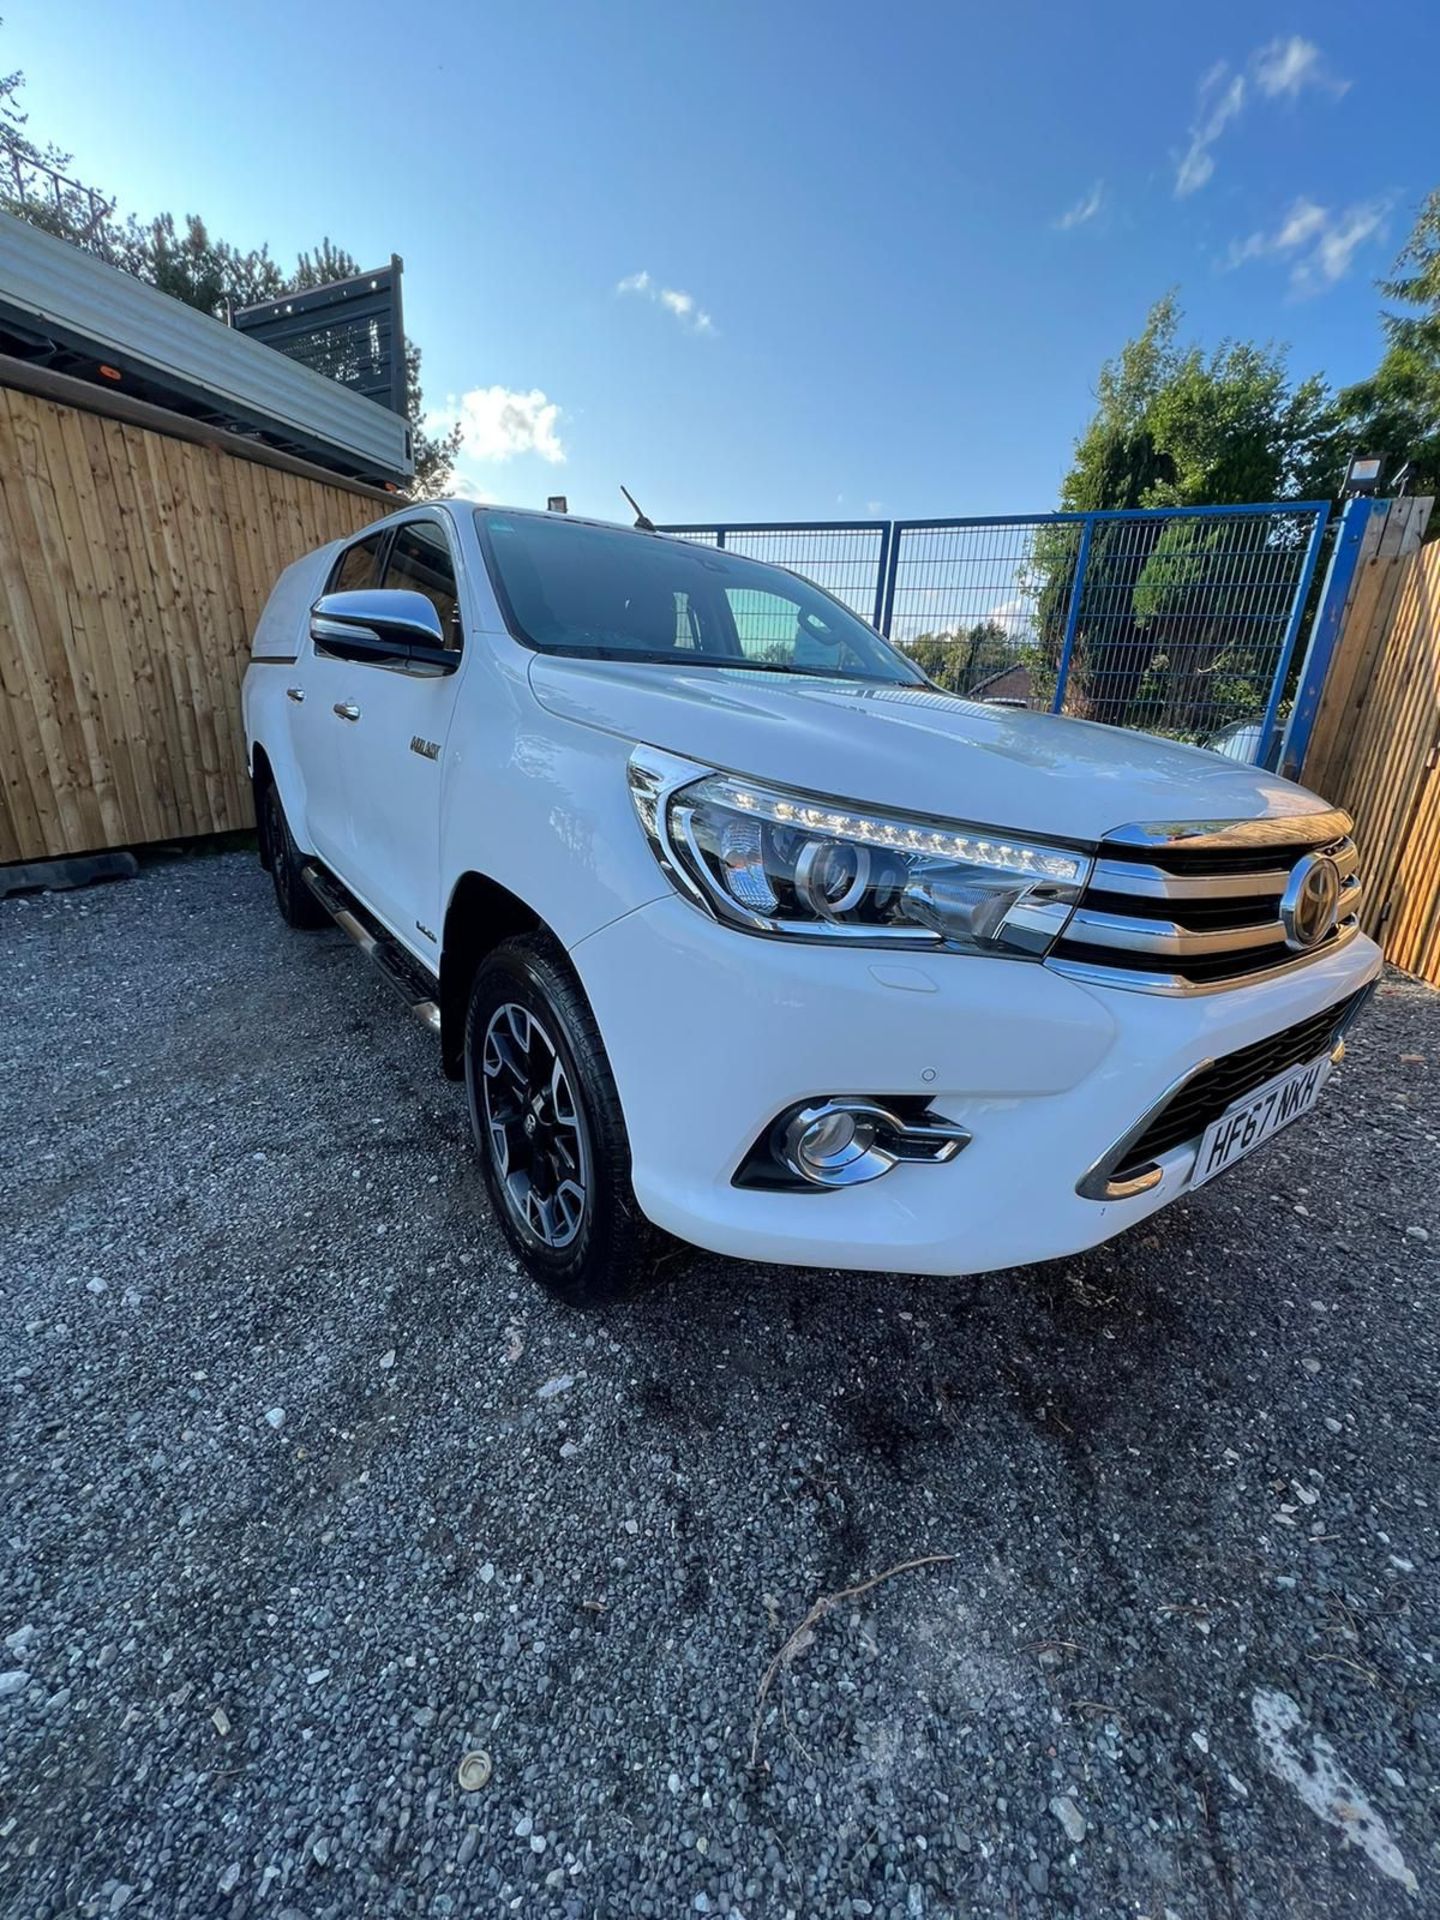 TOYOTA HILUX INVINCIBLE X DOUBLE CAB PICKUP TRUCK 67 REG - Image 12 of 14